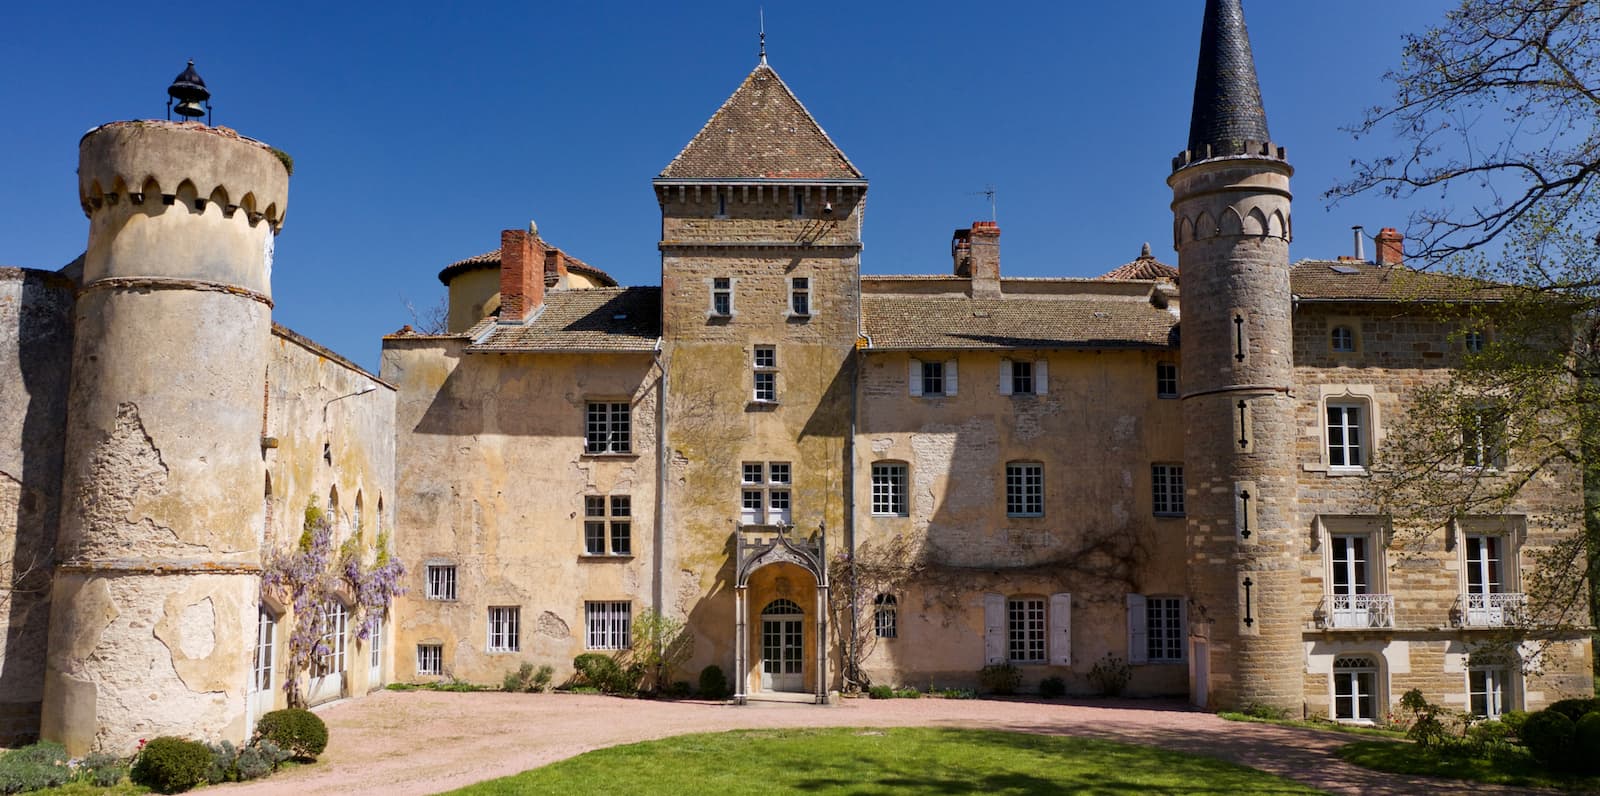 The western facade of the castle of Saint-Point